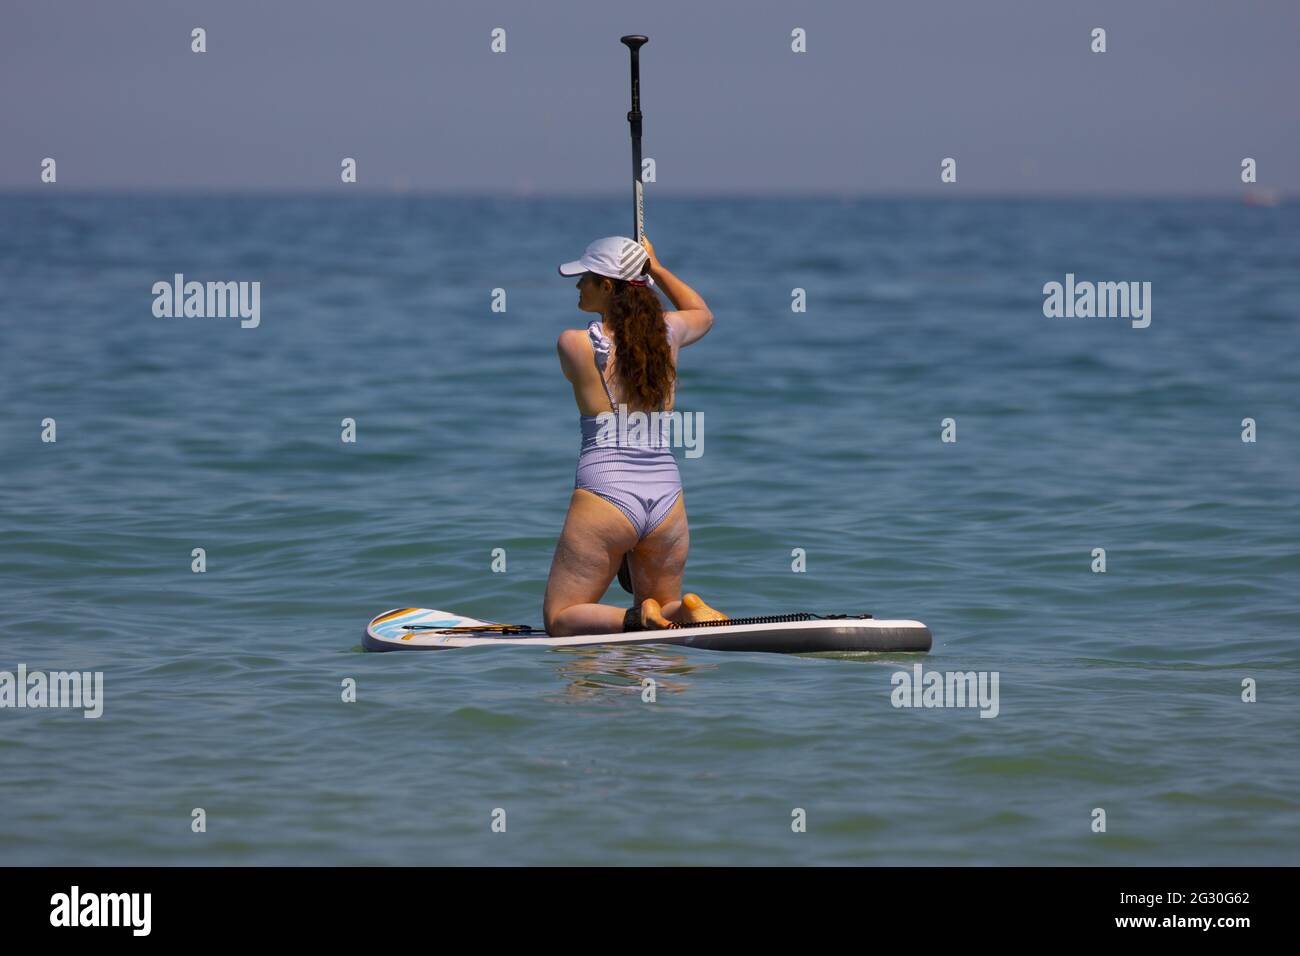 Harlyn Bay, Cornwall, UK. Sunday 13th June 2021, UK Weather:  The hottest day of the year so far with many people hitting the beach to call off in the sea.  A young female paddleboarder in the sea at Harlyn Bay, Cornwall © DGDImages/Alamy Live News Stock Photo